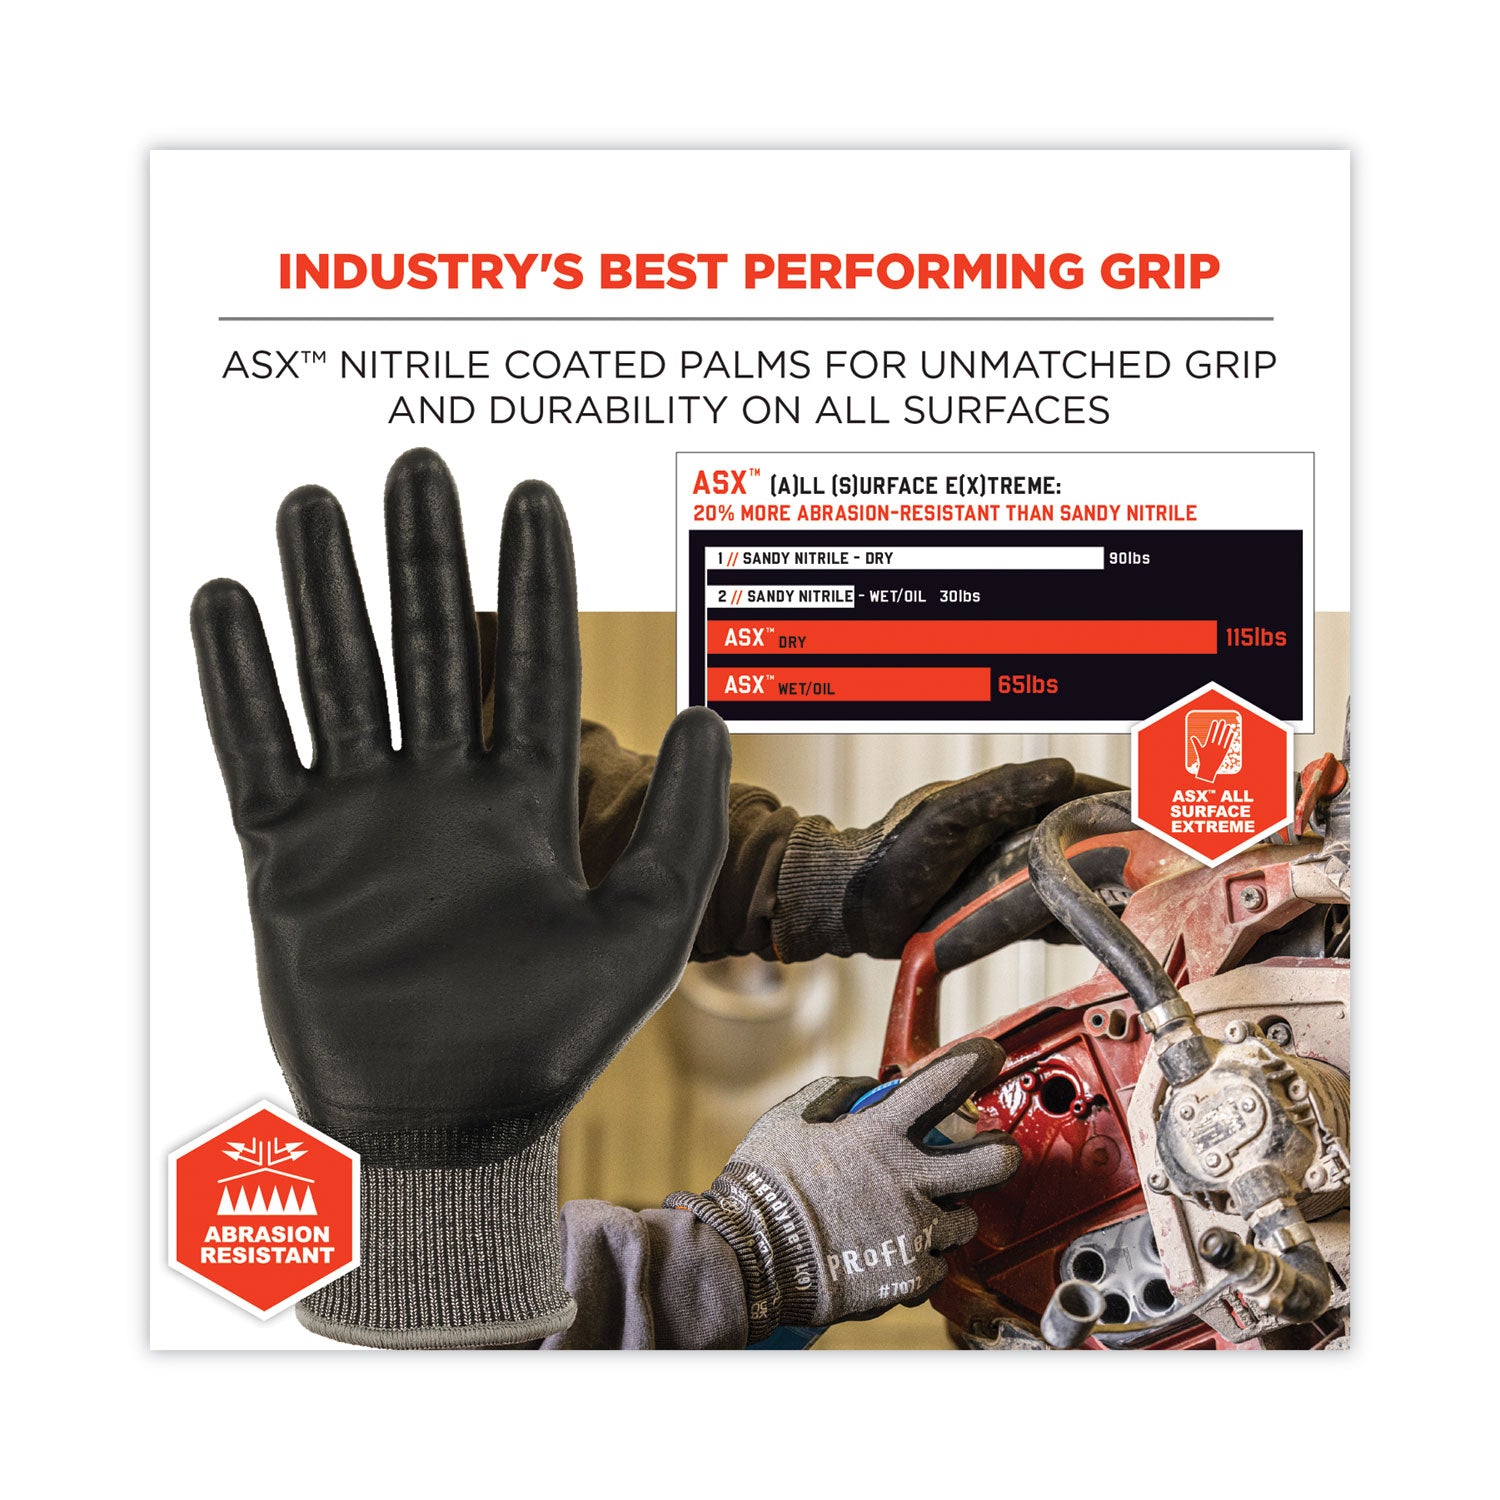 proflex-7072-ansi-a7-nitrile-coated-cr-gloves-gray-medium-pair-ships-in-1-3-business-days_ego10313 - 2